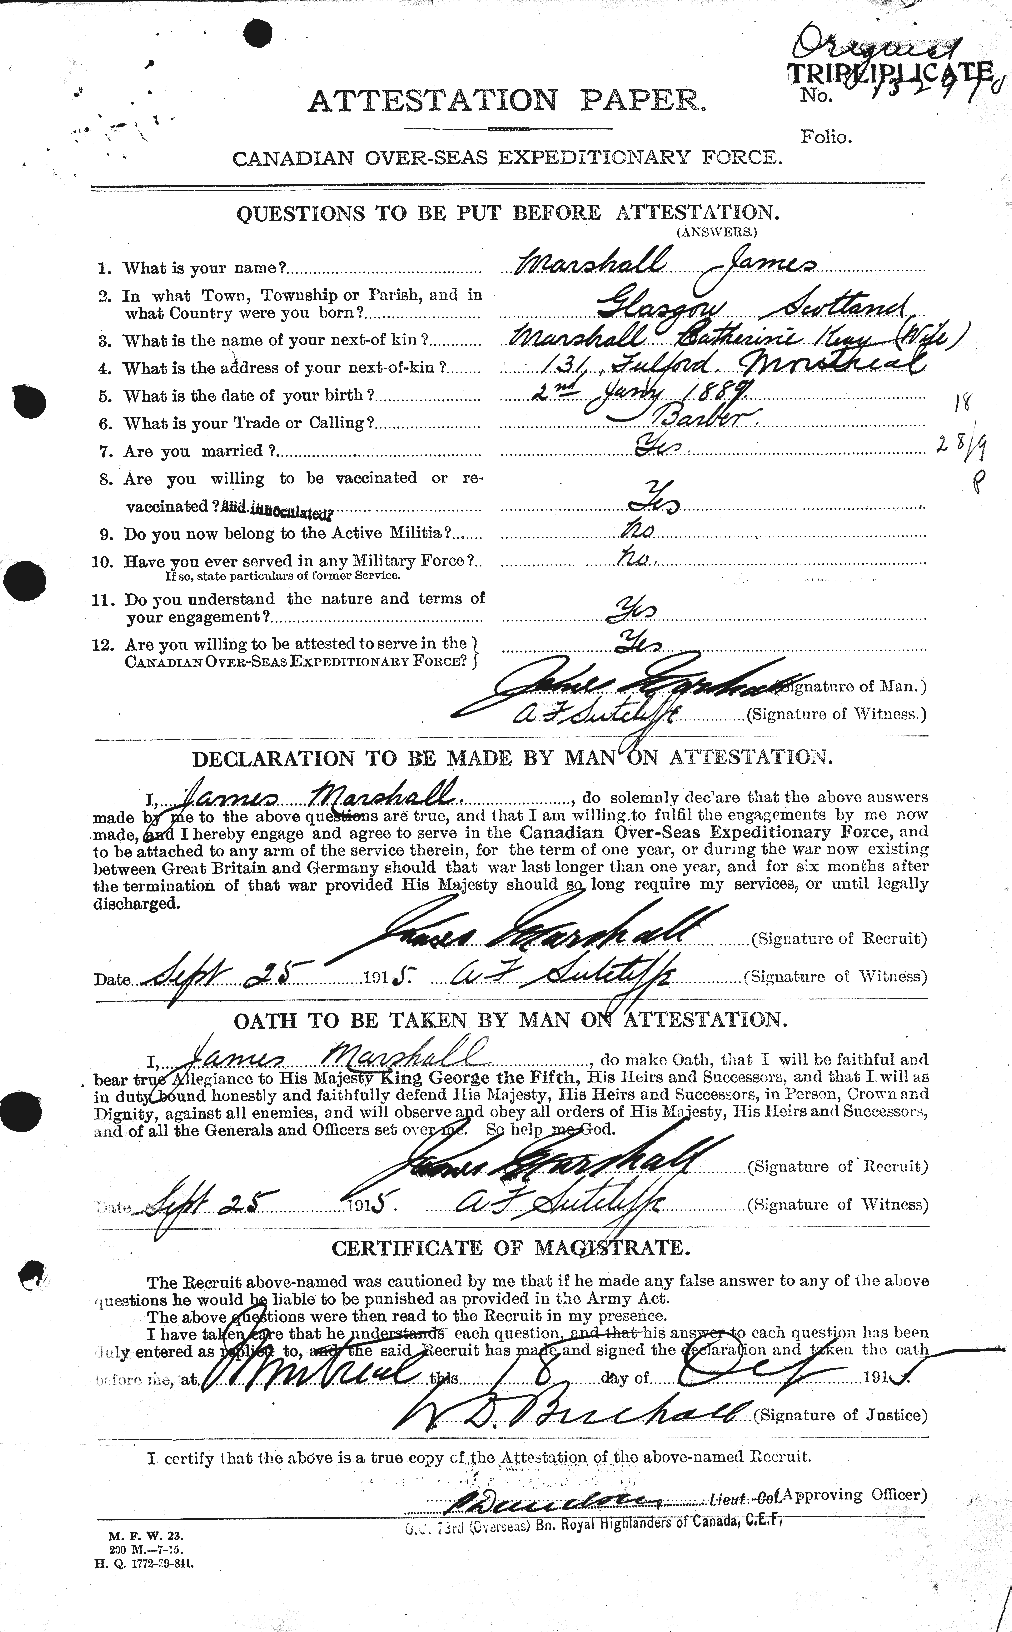 Personnel Records of the First World War - CEF 484320a